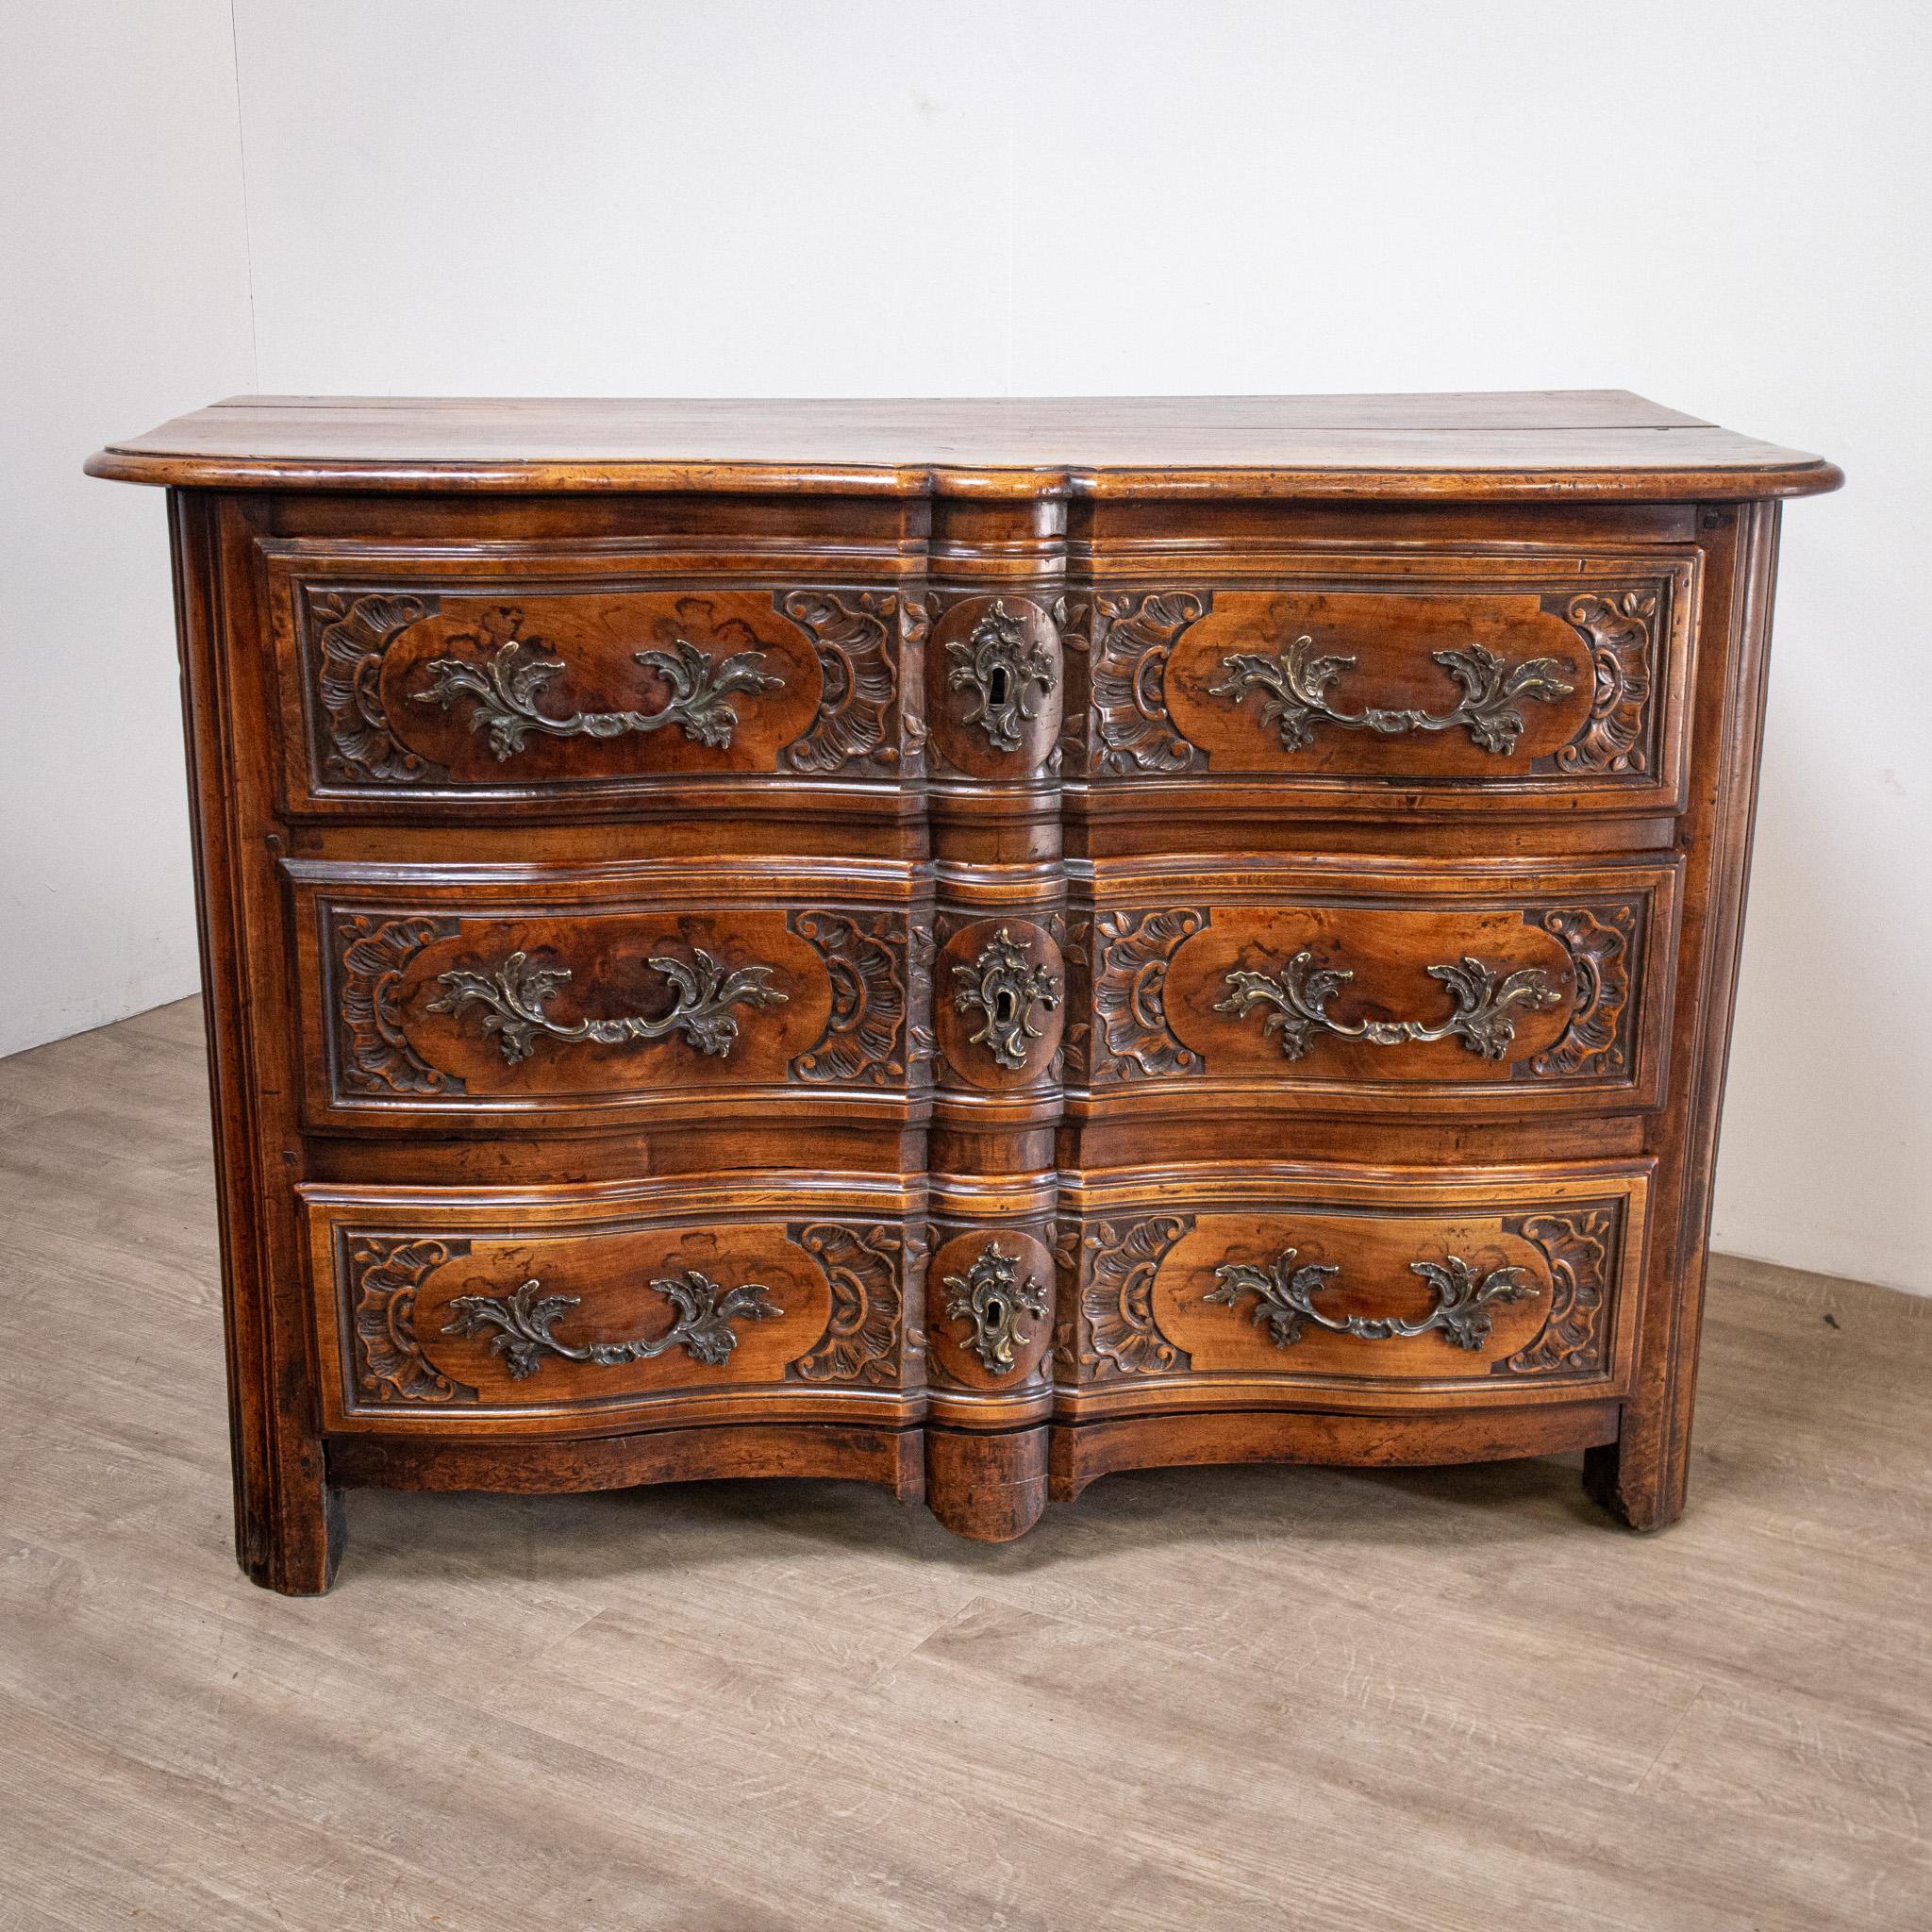 A wonderful piece of furniture, this fine 18th century French Régence commode or chest of drawers has a feel of the massive about it. With the beautiful patina and deep colour expected for a piece of walnut of this age, it has lovely large